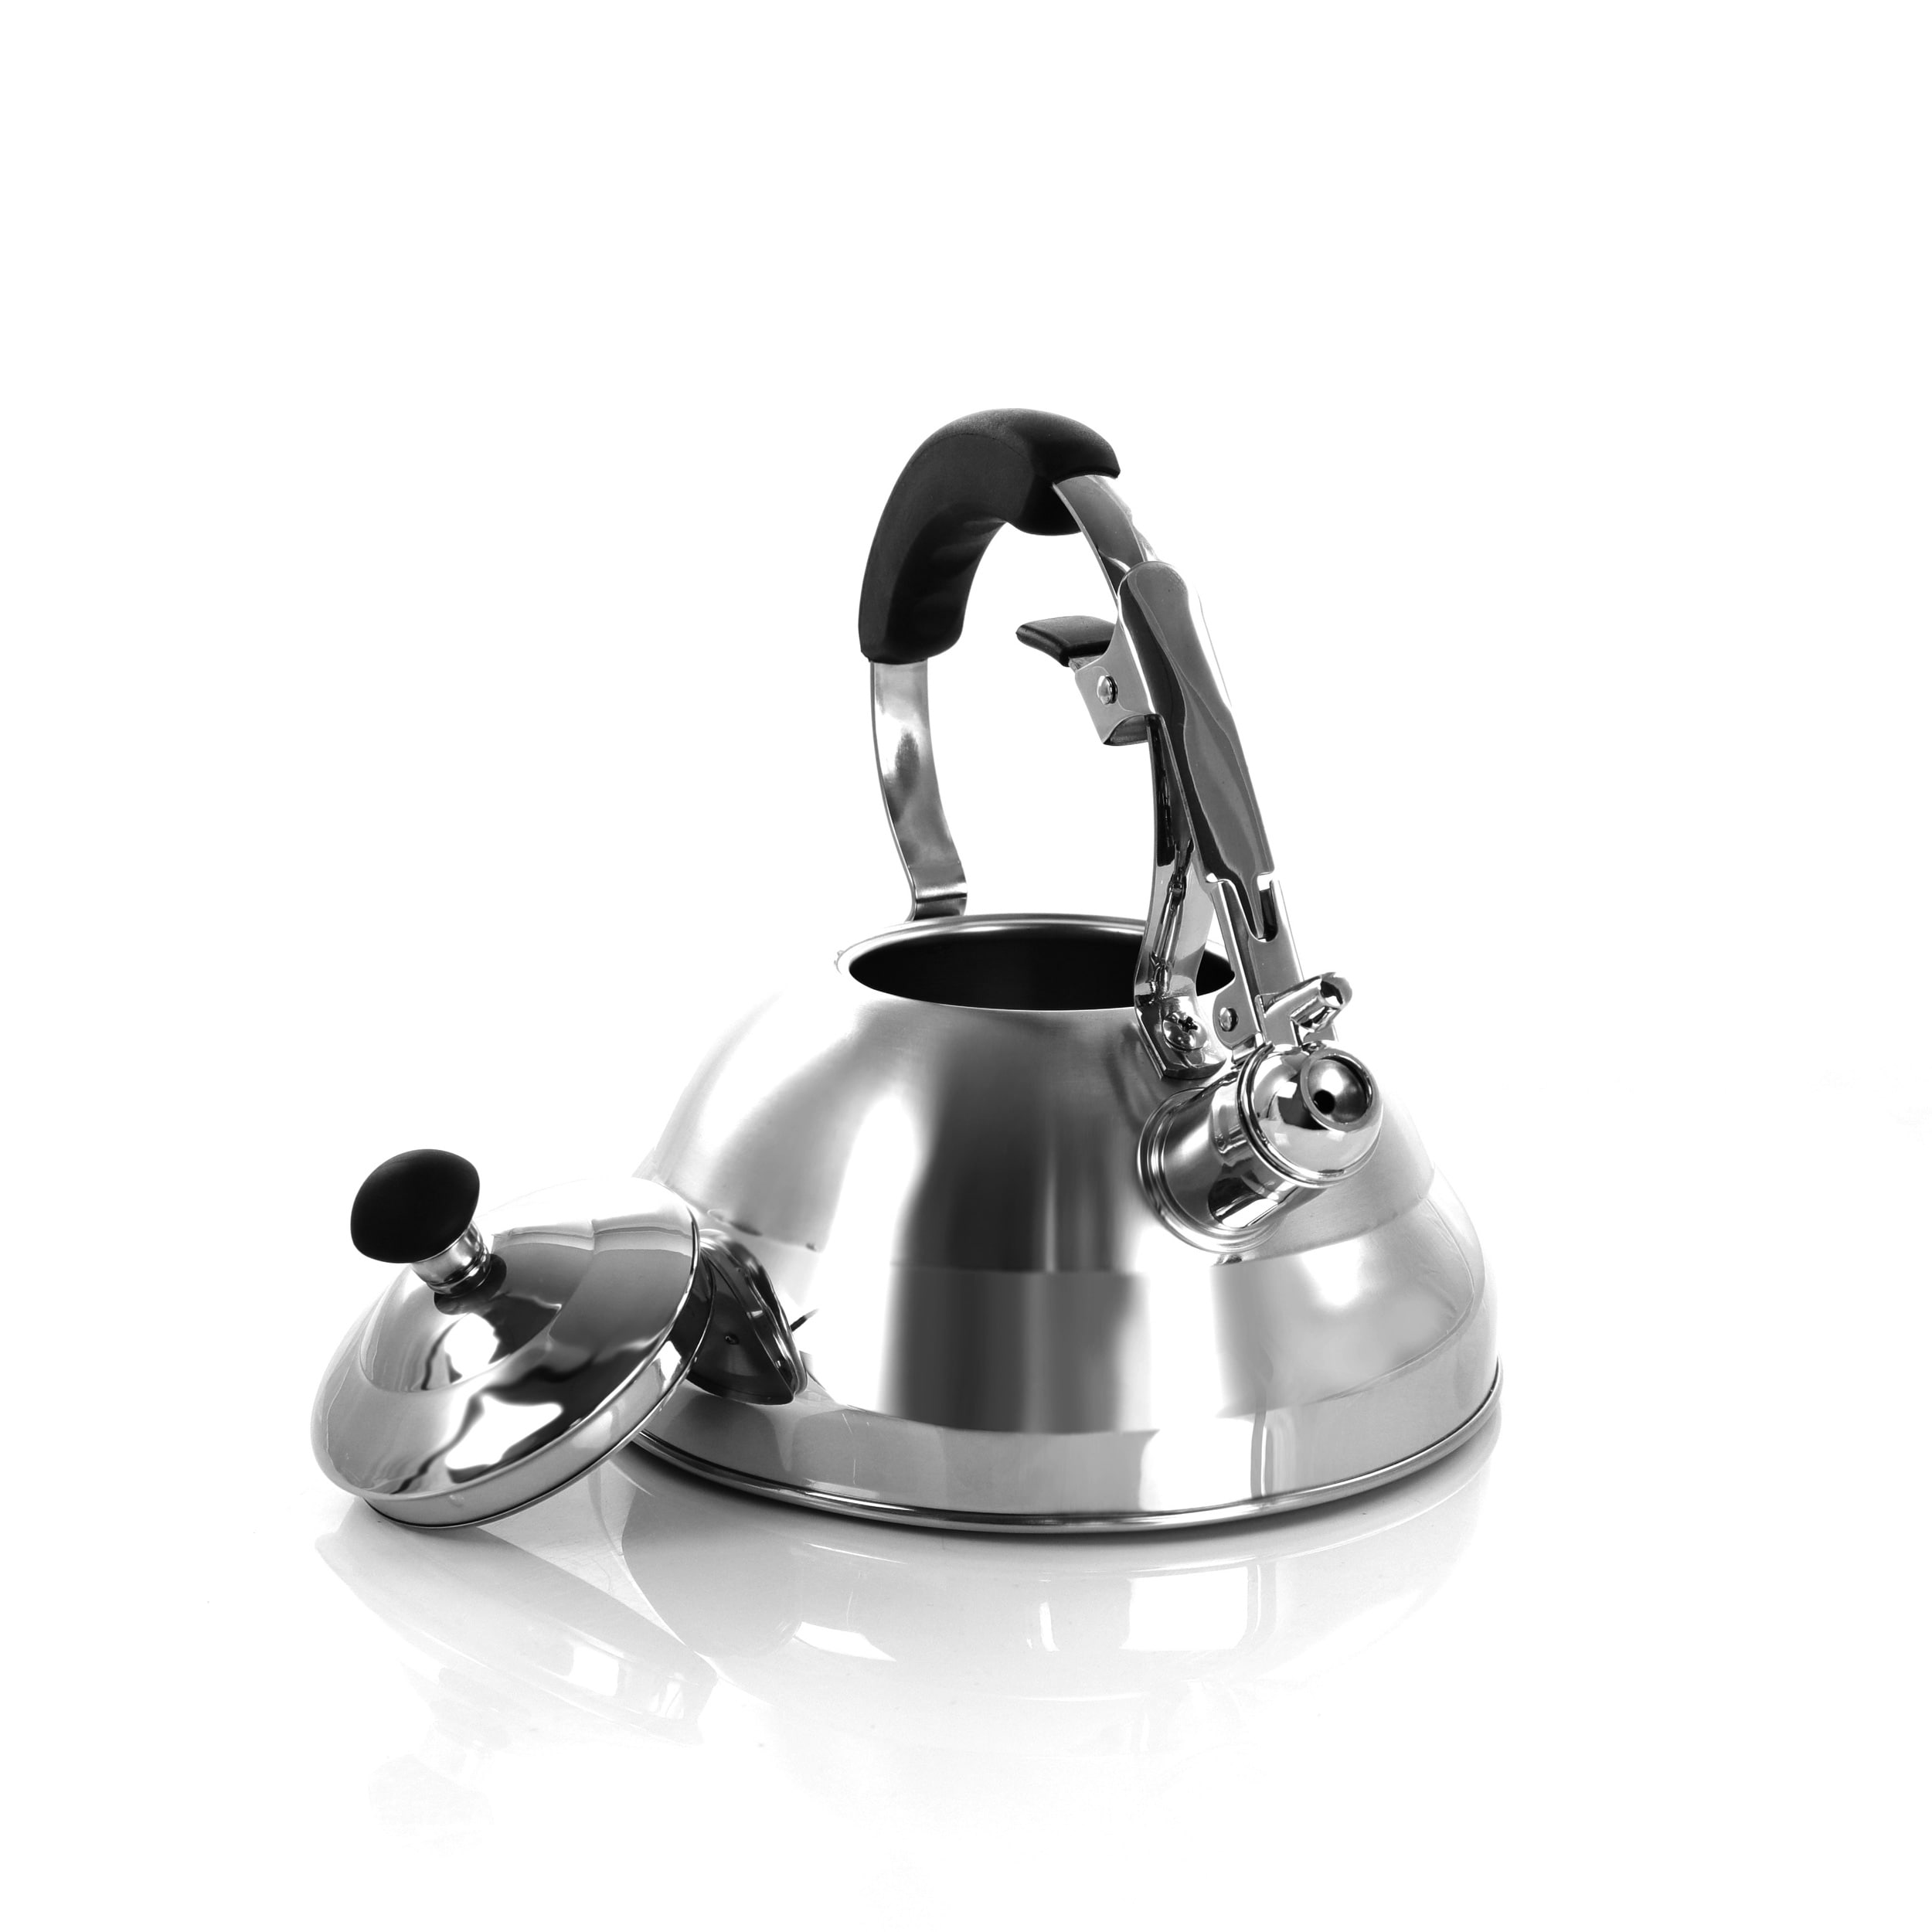 ELITRA Stove Top Whistling Fancy Tea Kettle - Stainless Steel 2.7